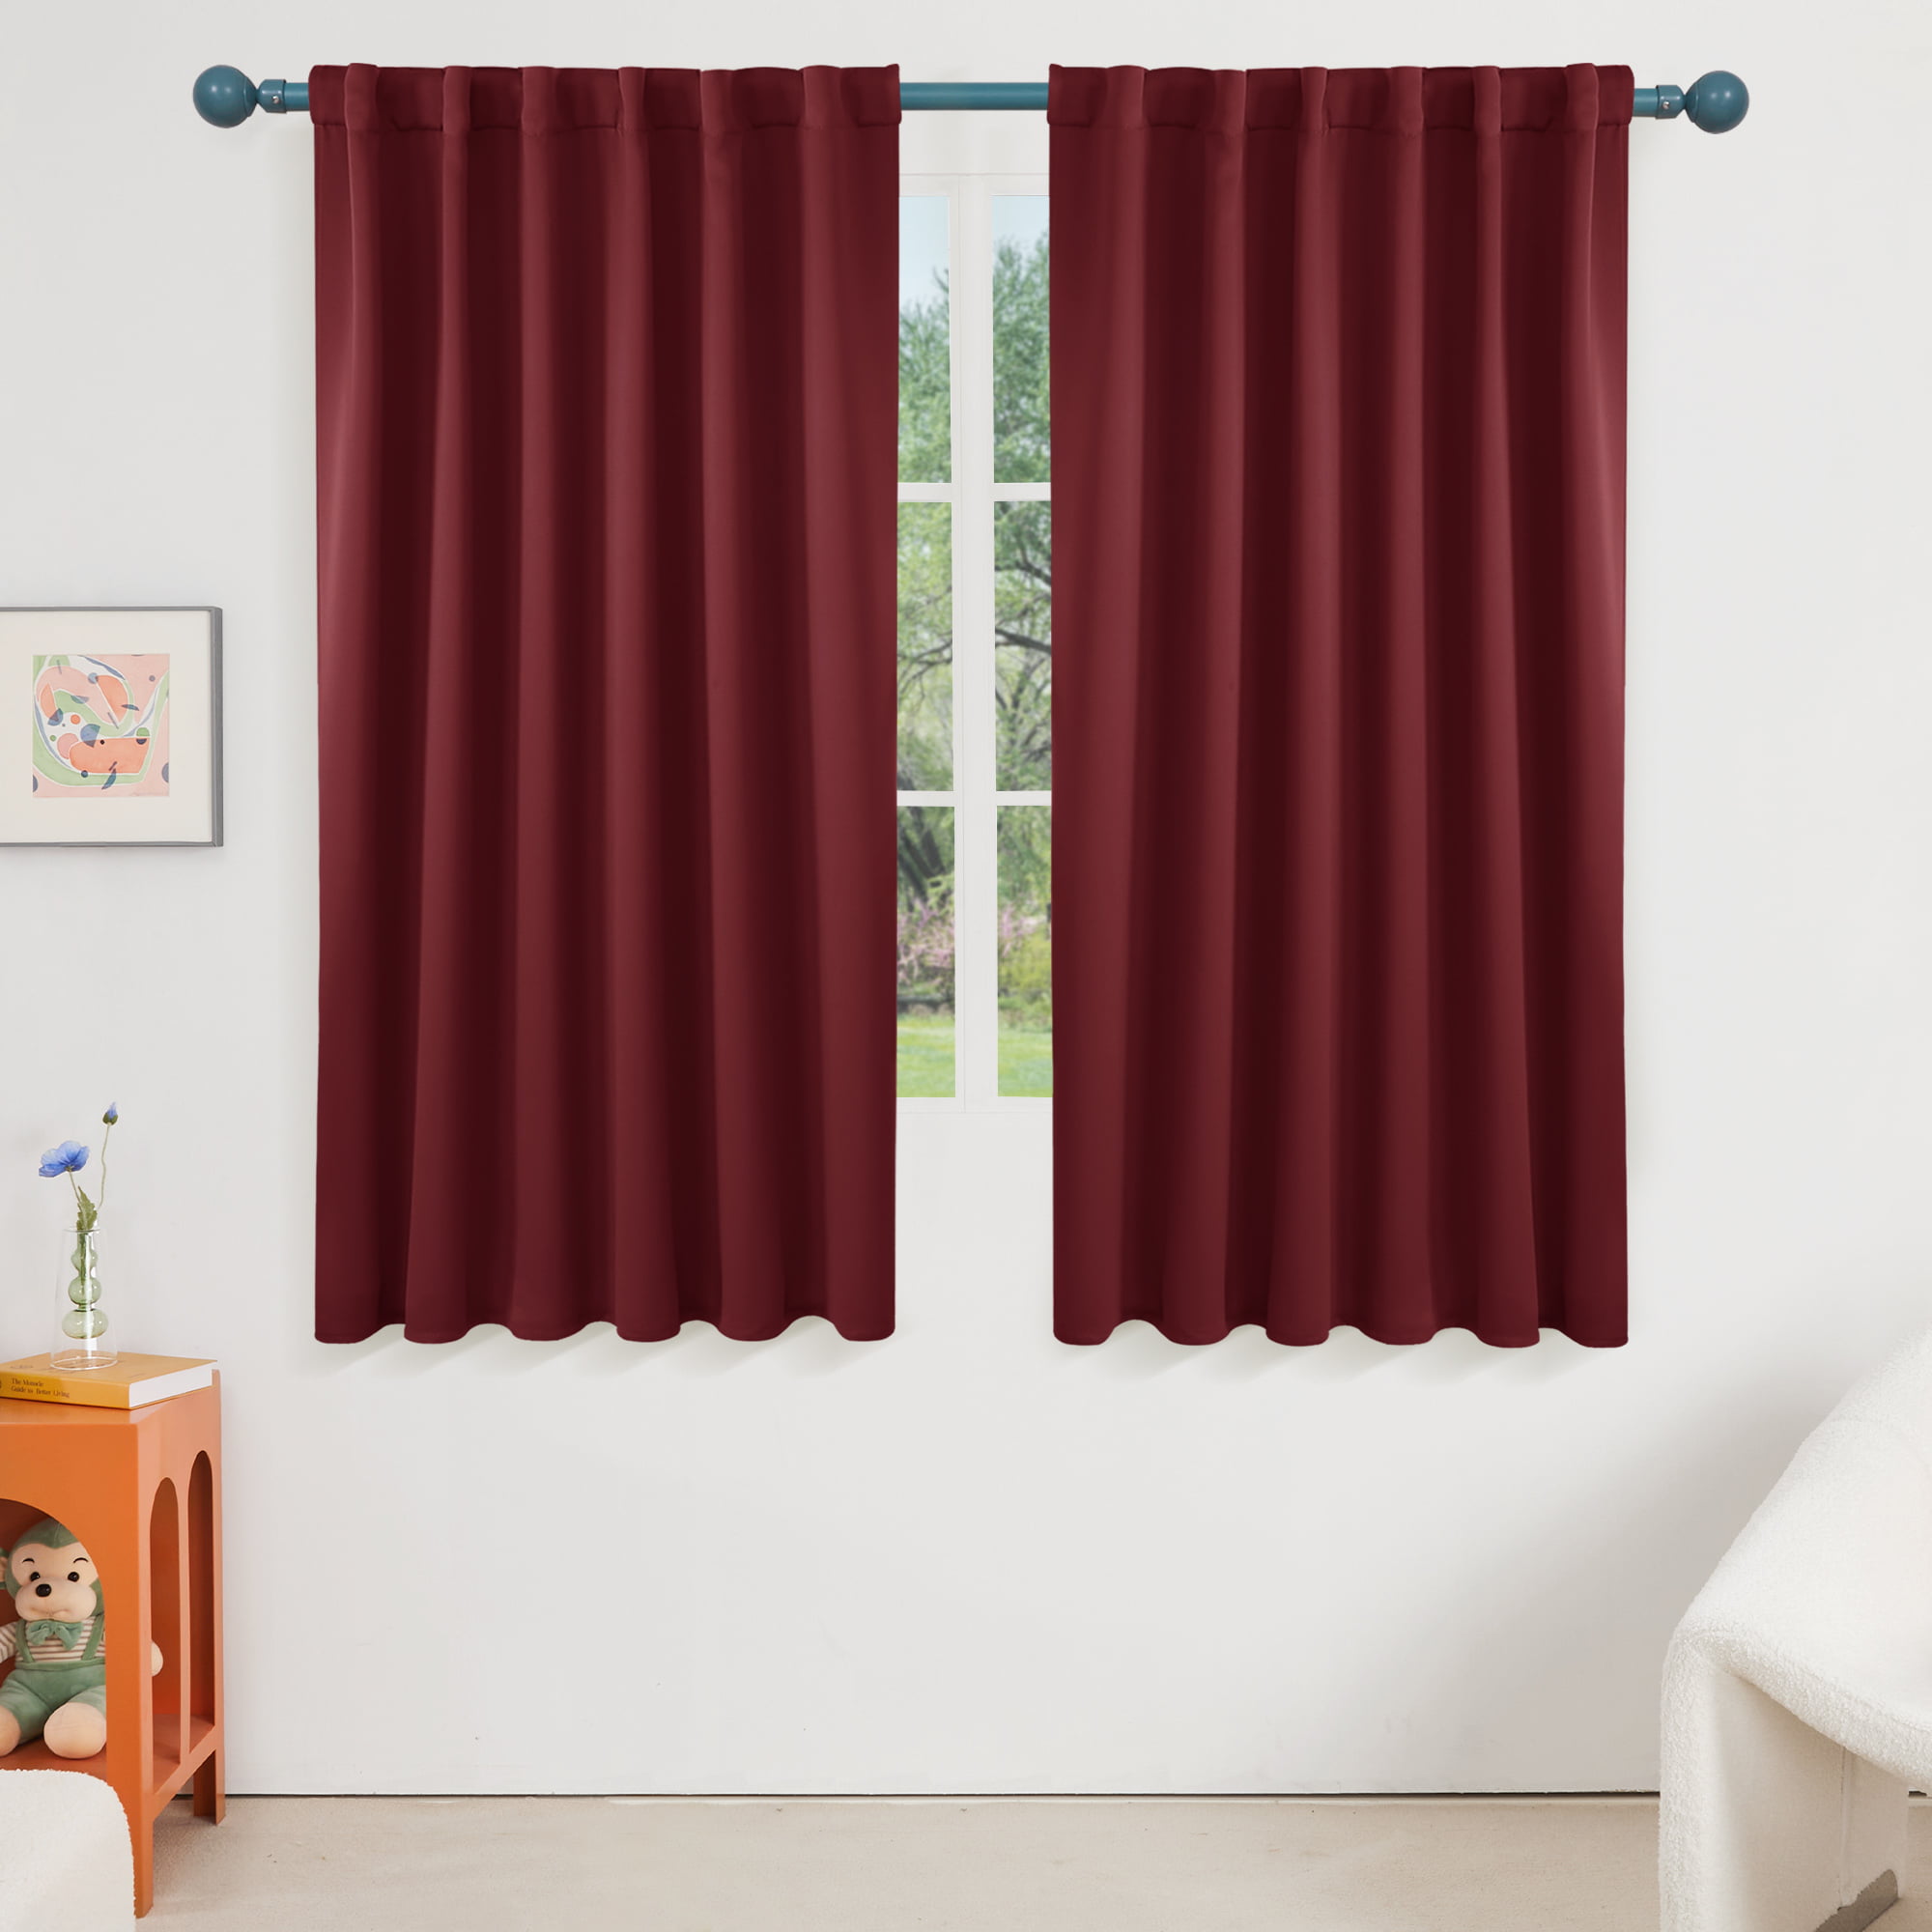 2Panels Window Curtain Great Scenic 3D Blockout Fabric Photo Curtain Drapes 099 